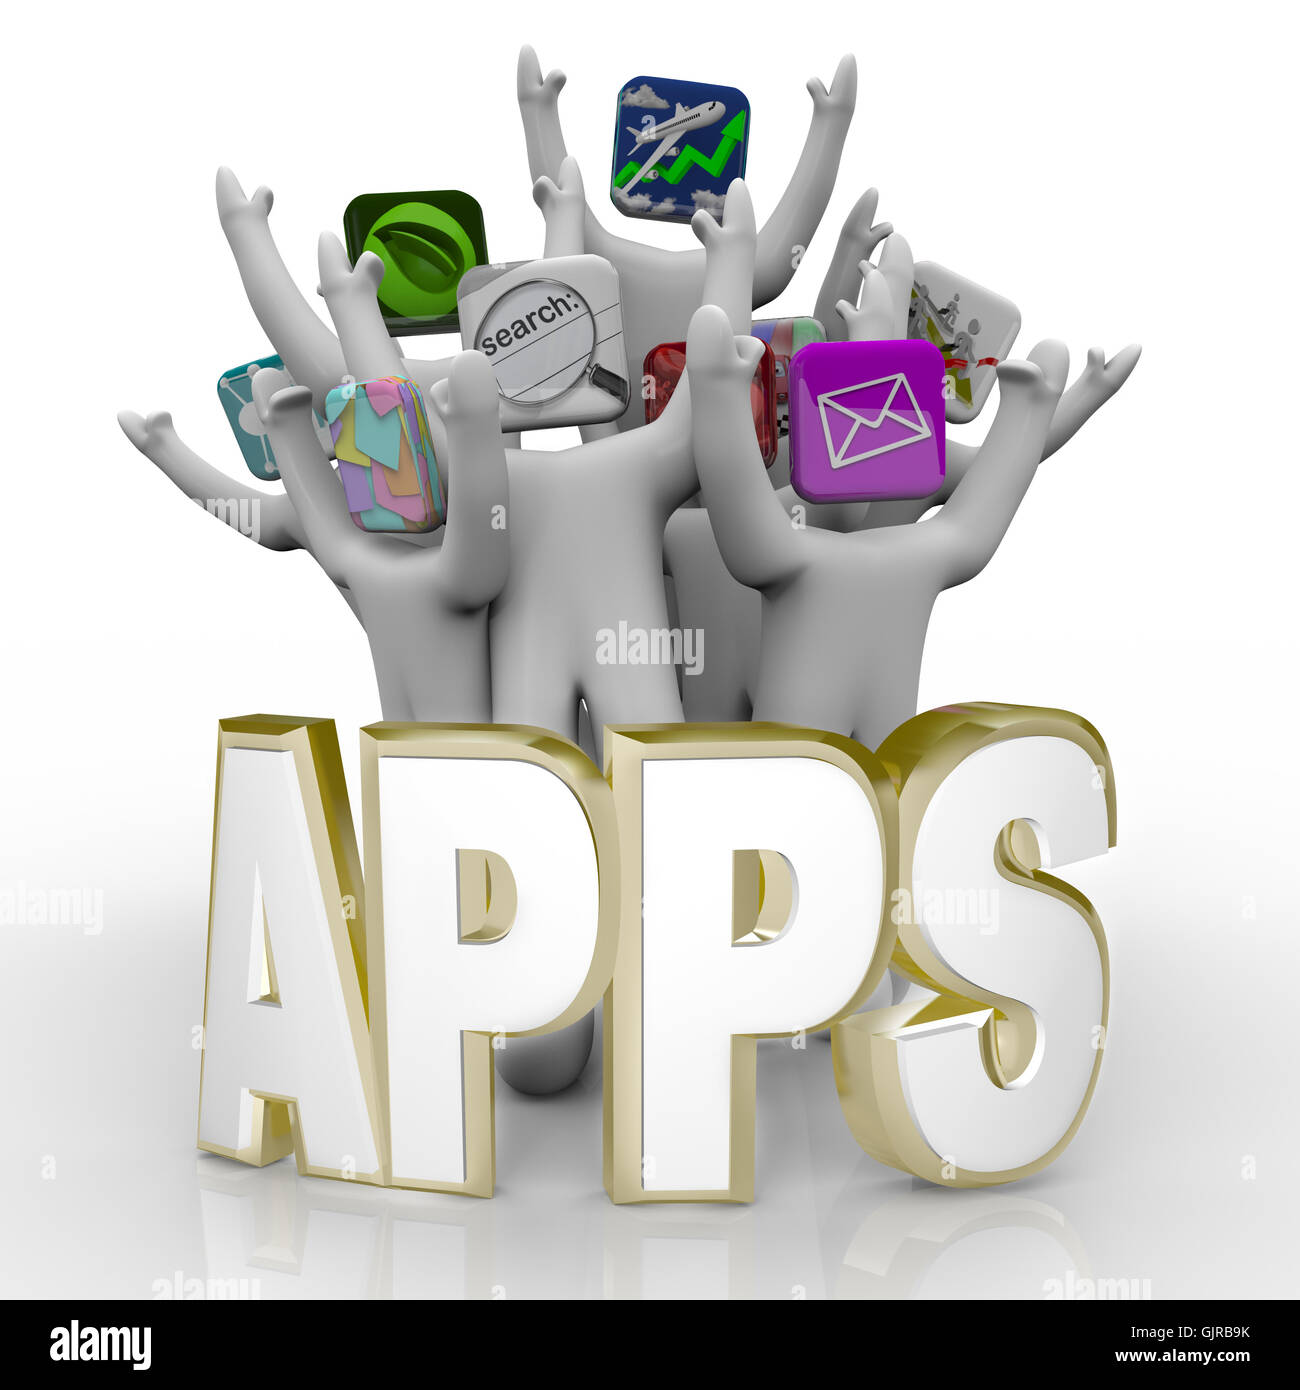 Apps - Word and People Cheering Stock Photo